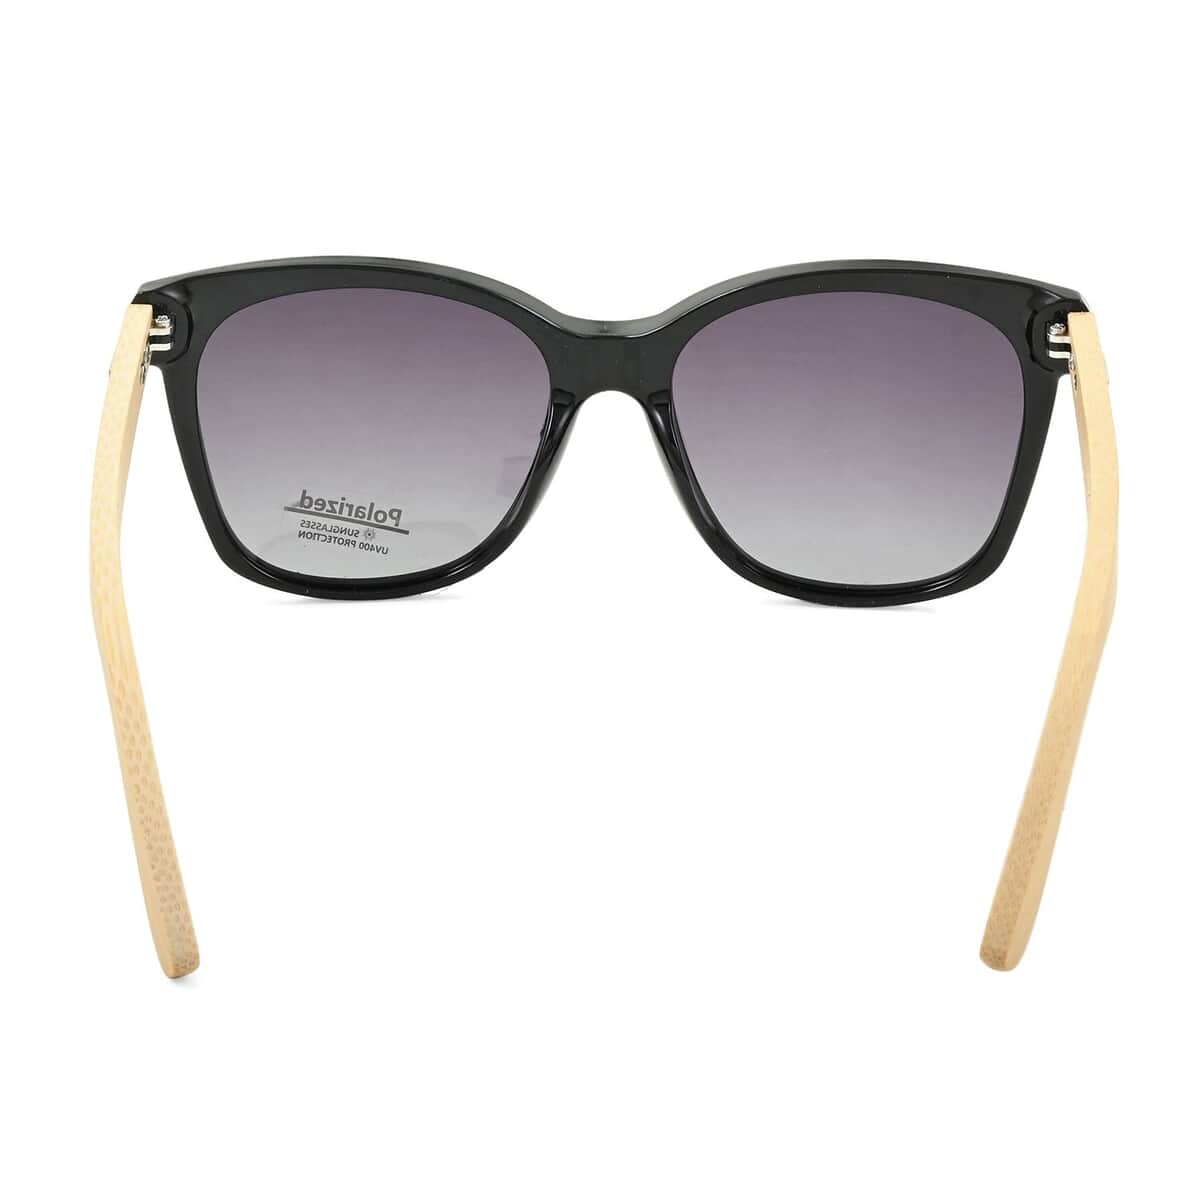 UV400 and Polarized PC Sunglasses with Bamboo Temples, Pouch and Case image number 2